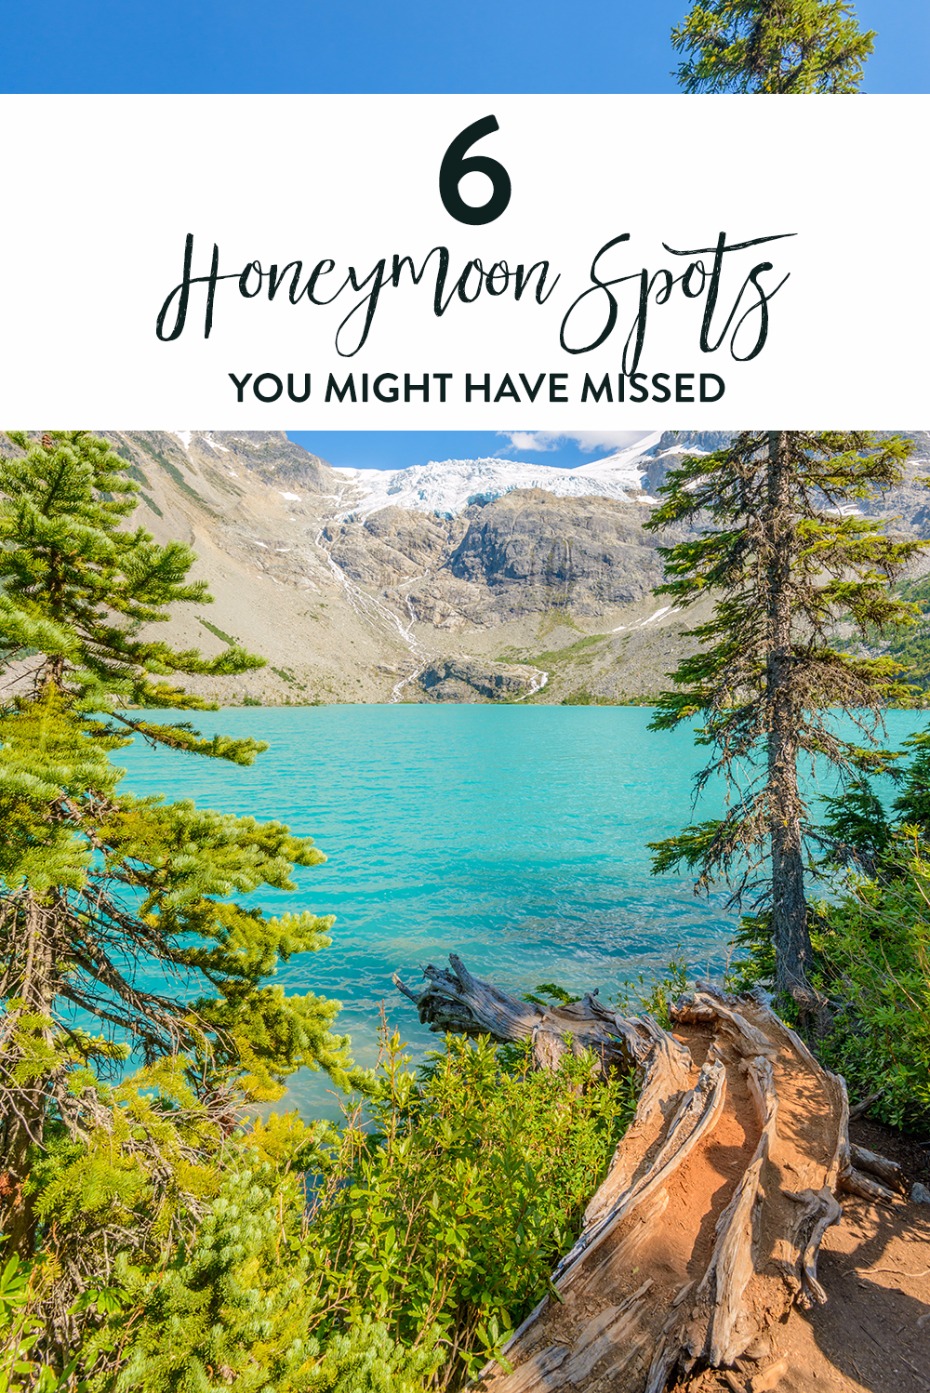 6 honeymoon spots that you may have missed